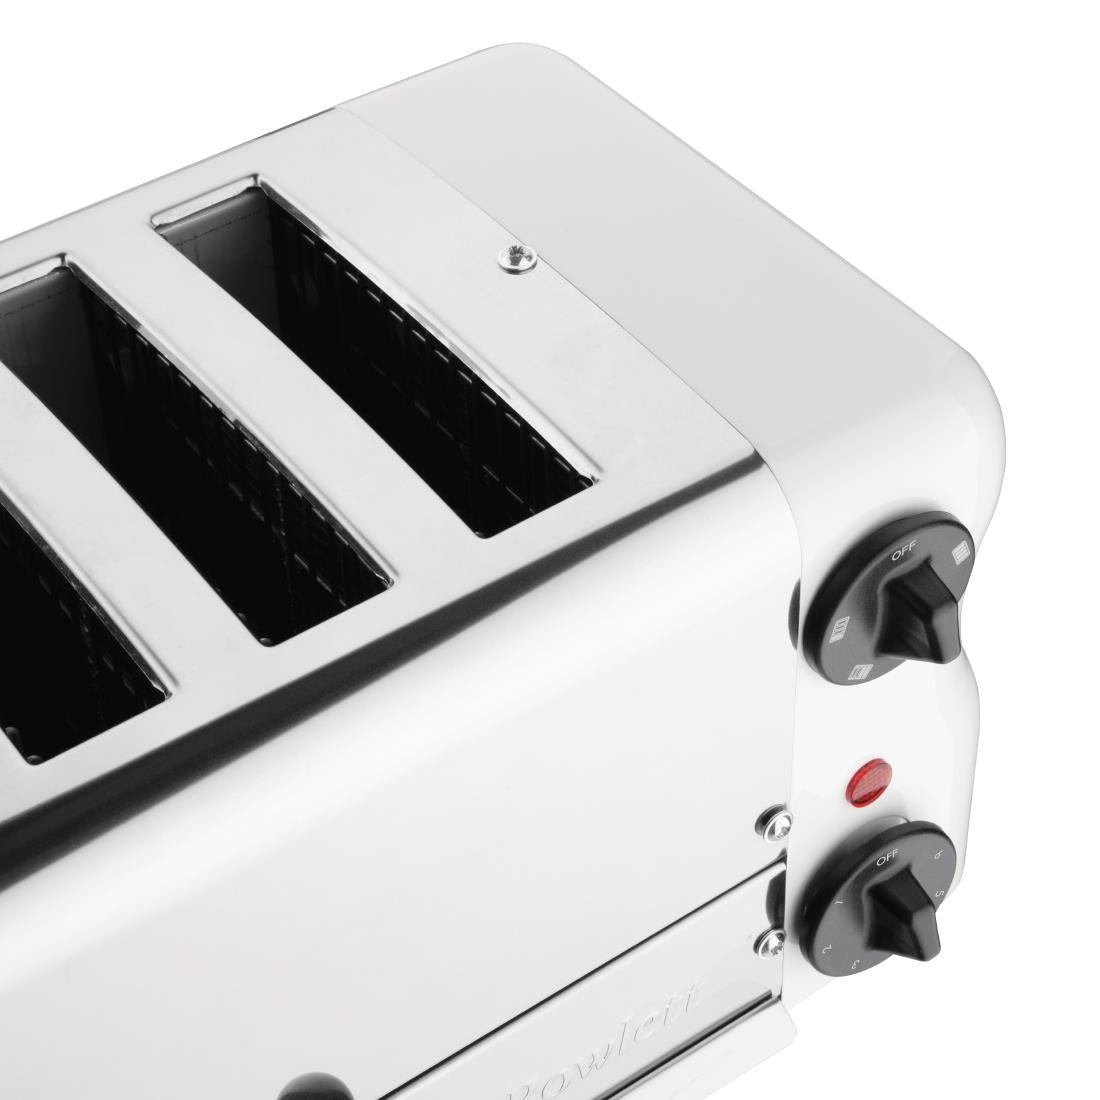 CH182 Rowlett Esprit 4 Slot Toaster White w/2x Additional Elements & Sandwich Cage JD Catering Equipment Solutions Ltd